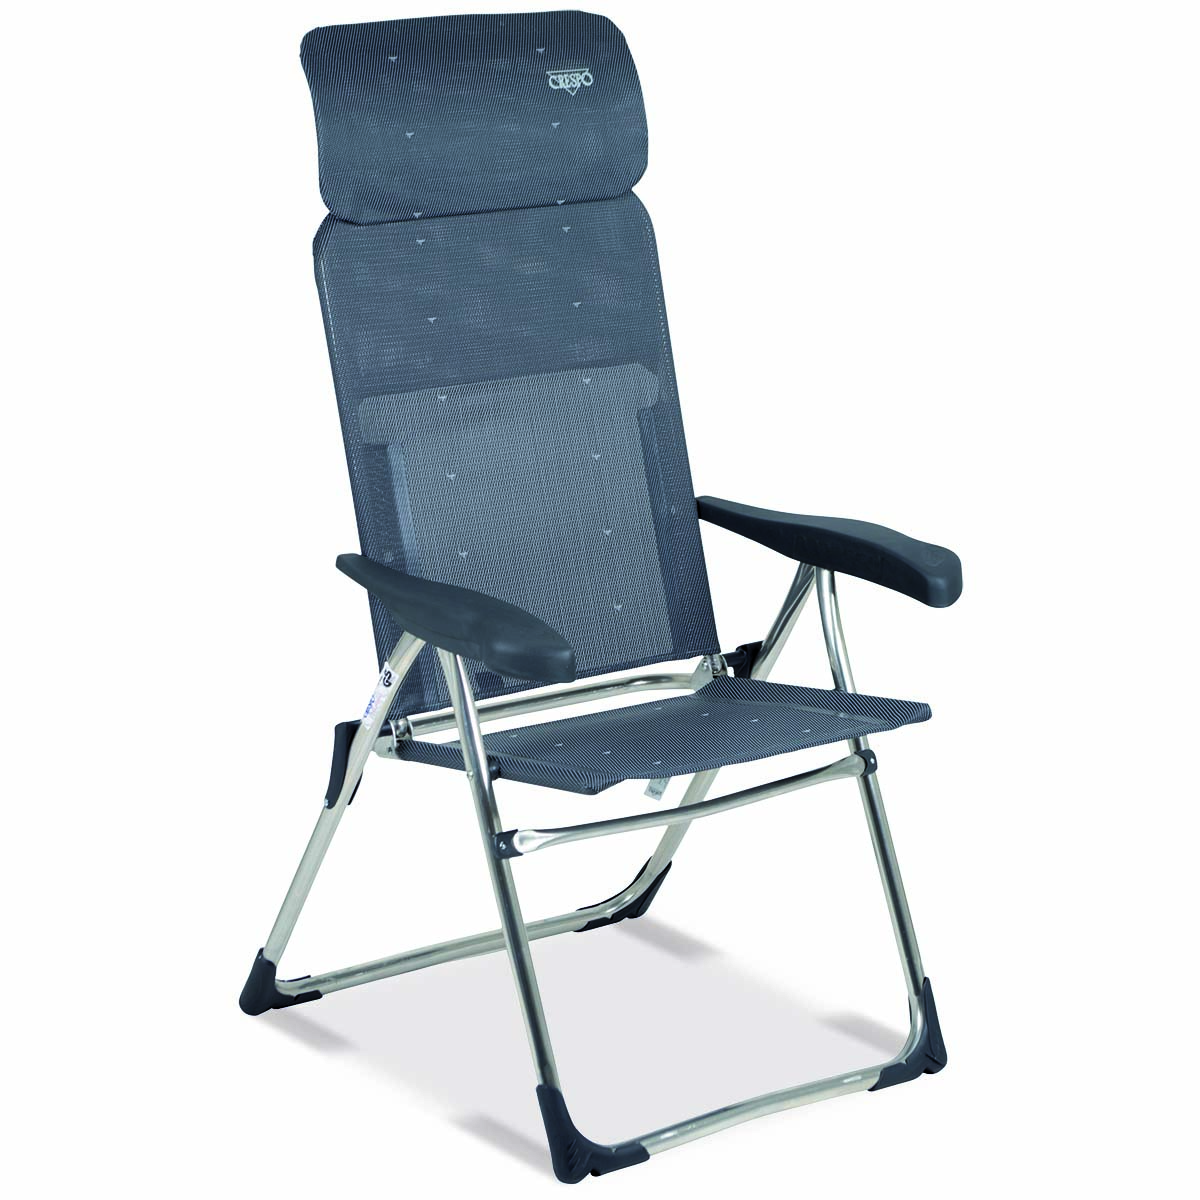 1104970 An extremely compact positionable seat. Also the most flat camping chair. This chair folds flat to a thickness of only 5 centimetres This chair offers maximum comfort through the 7 position adjustable backrest and a continuously adjustable headrest (back length: 65-83 cm). The chair has a U-frame with stabilizers and extra thick tubes for additional sturdiness and stability. Easily folding and extra compact to store. Ideal for the tent trailer, bus camper or for other campers.